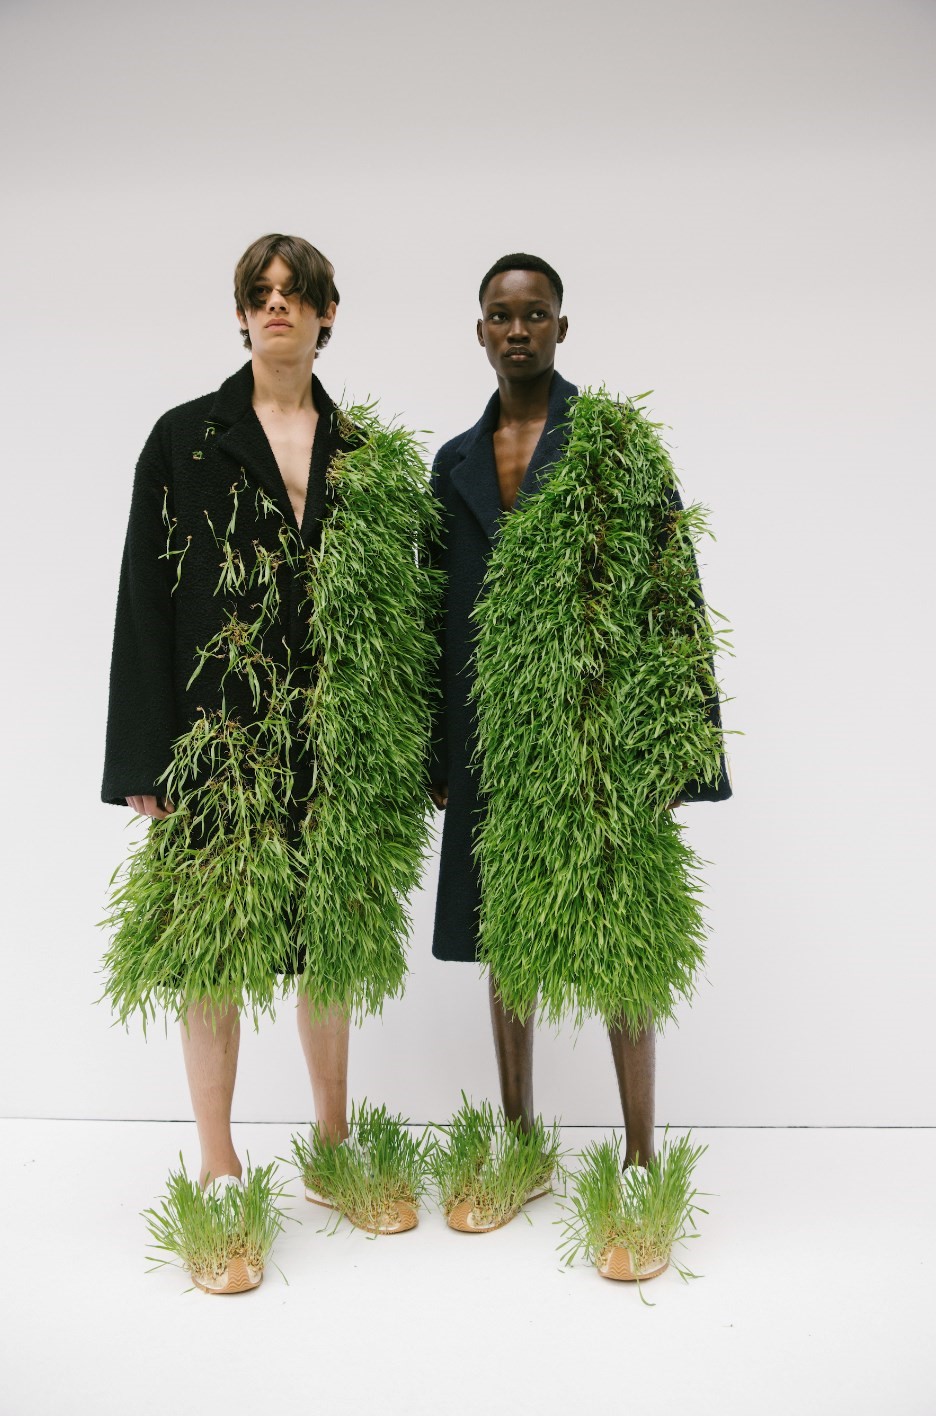 Meet the young Spanish designer responsible for Loewe's horticouture